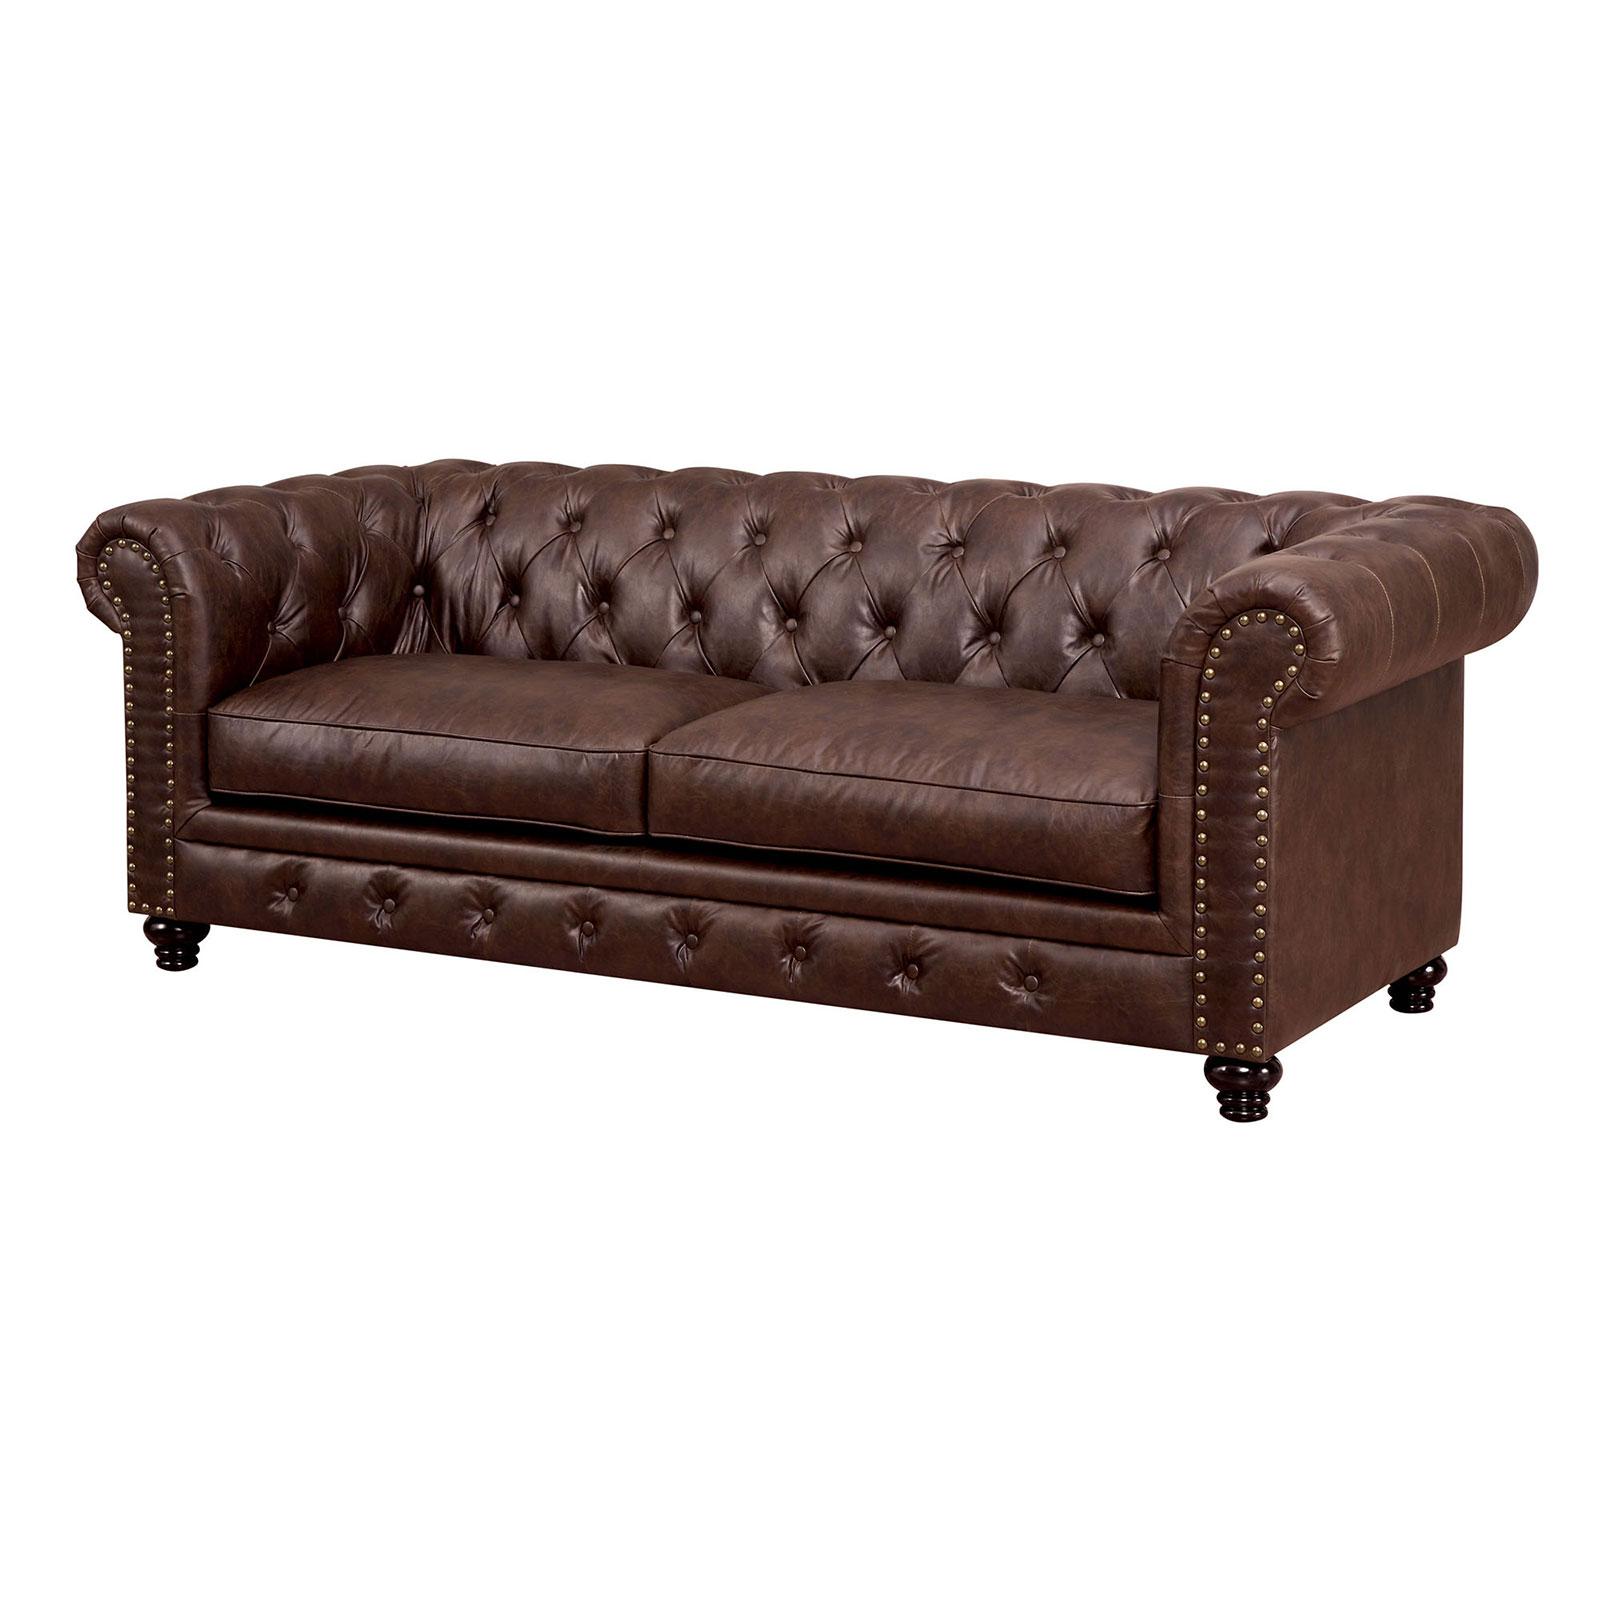 Transitional Sofa STANFORD CM6269BR-SF CM6269BR-SF in Brown Leatherette